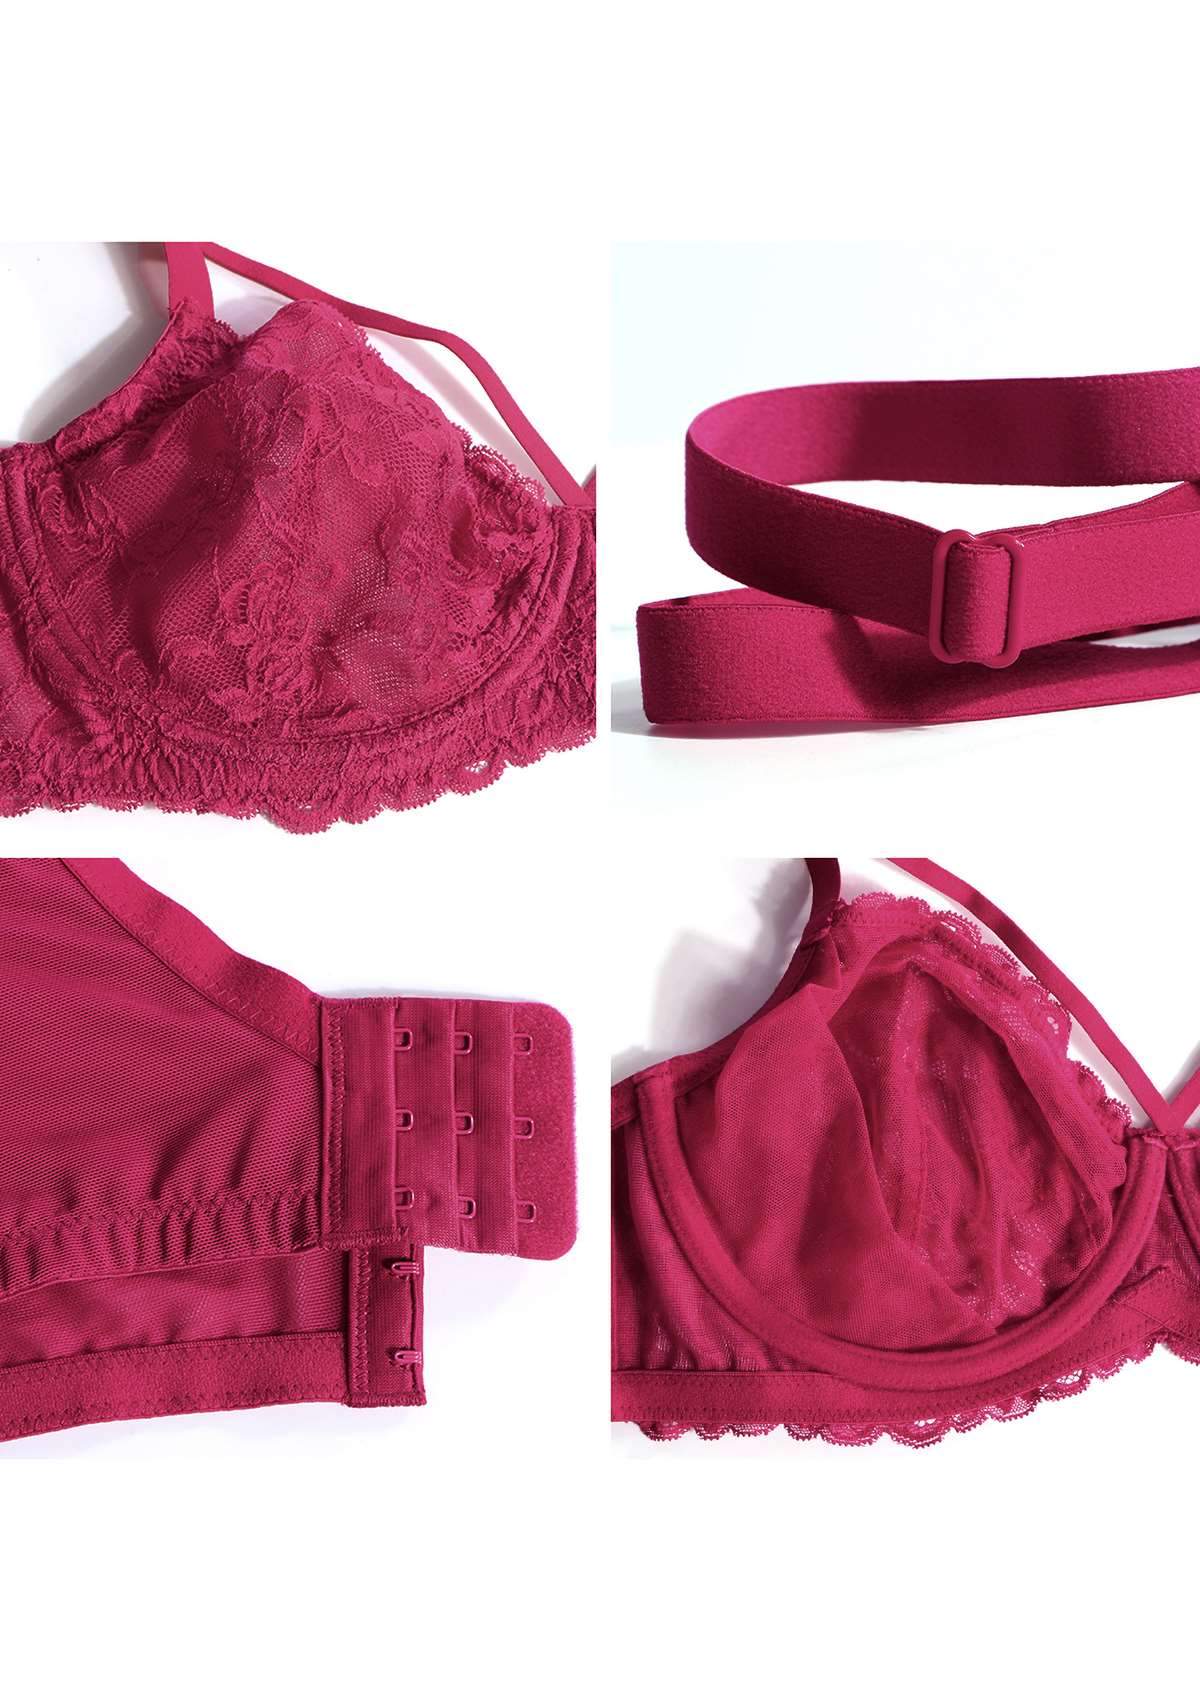 HSIA Pretty In Petals Sexy Lace Bra: Full Coverage Back Smoothing Bra - Red / 44 / G